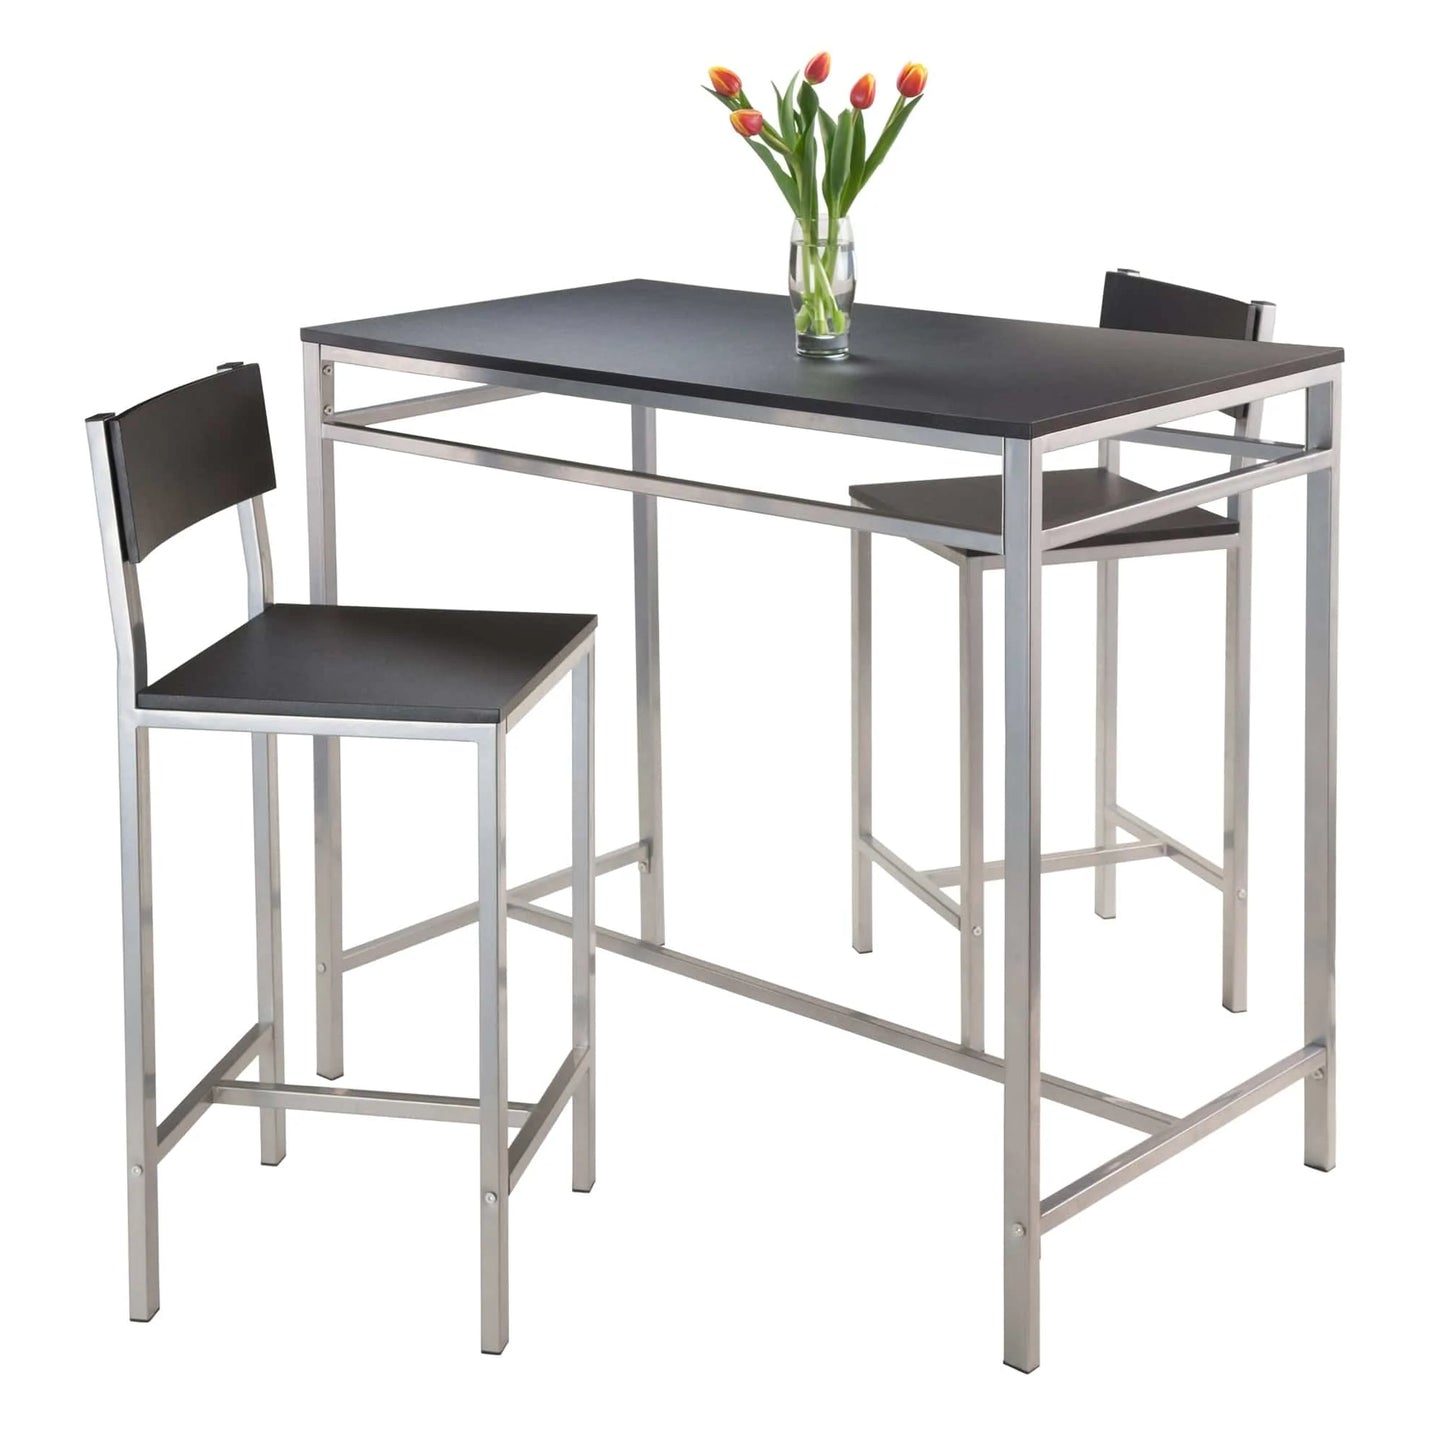 WINSOME Pub Table Set Hanley 3-Pc Kitchen Table with Counter Stools, Black and Steel